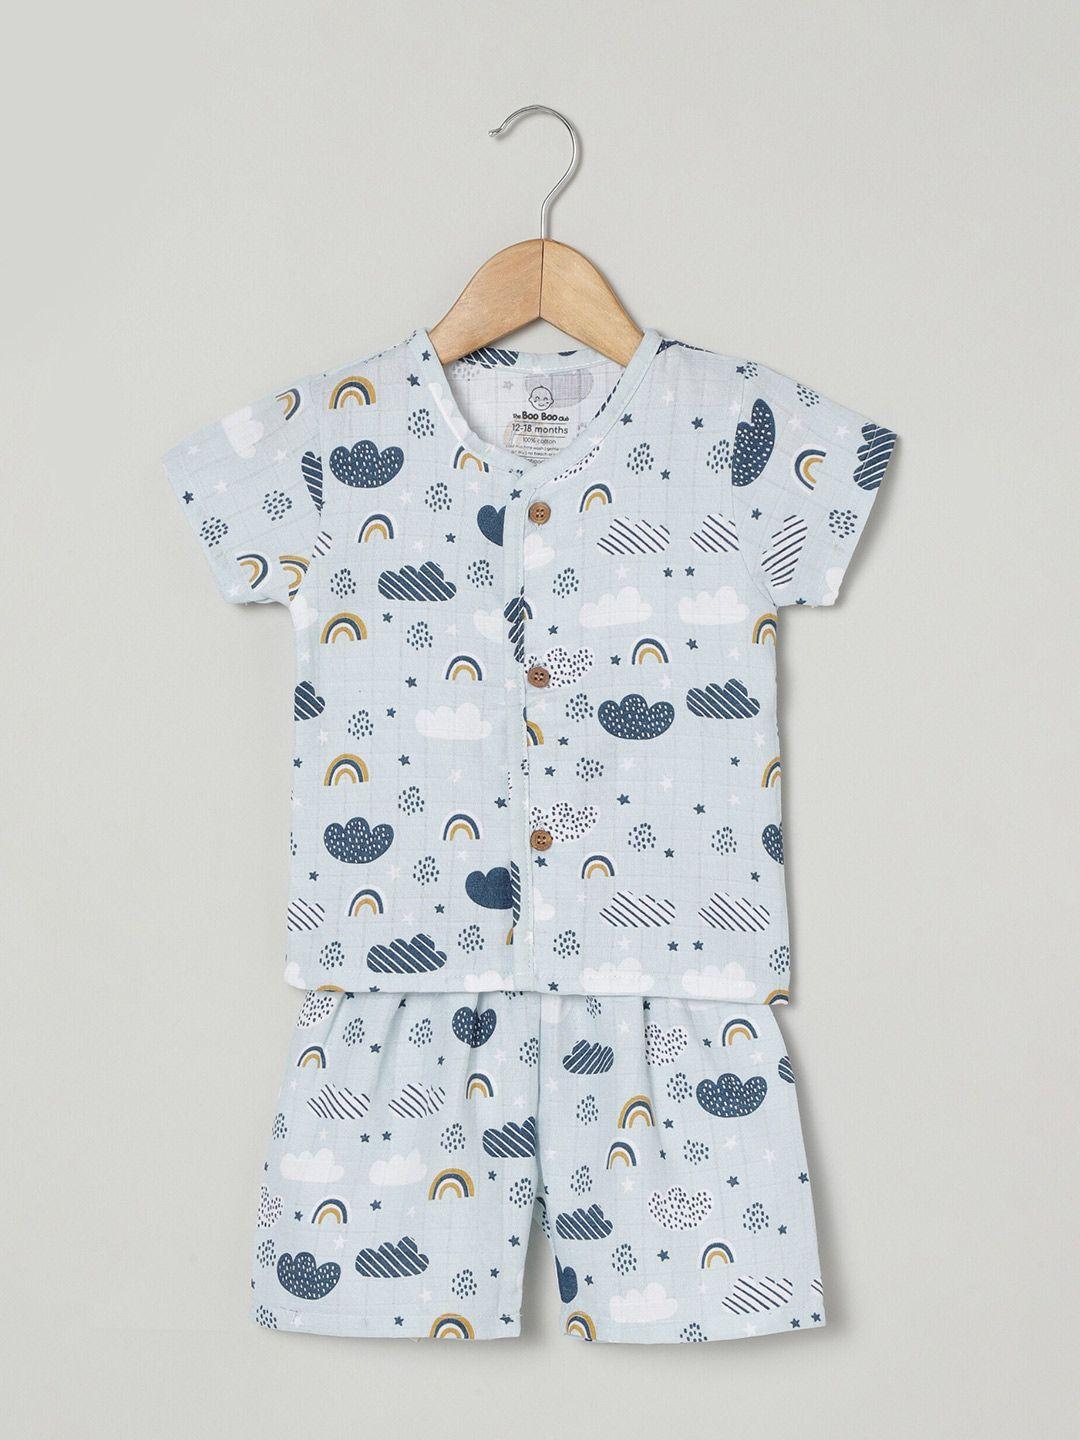 the boo boo club kids printed muslin organic cotton sustainable shirt with shorts